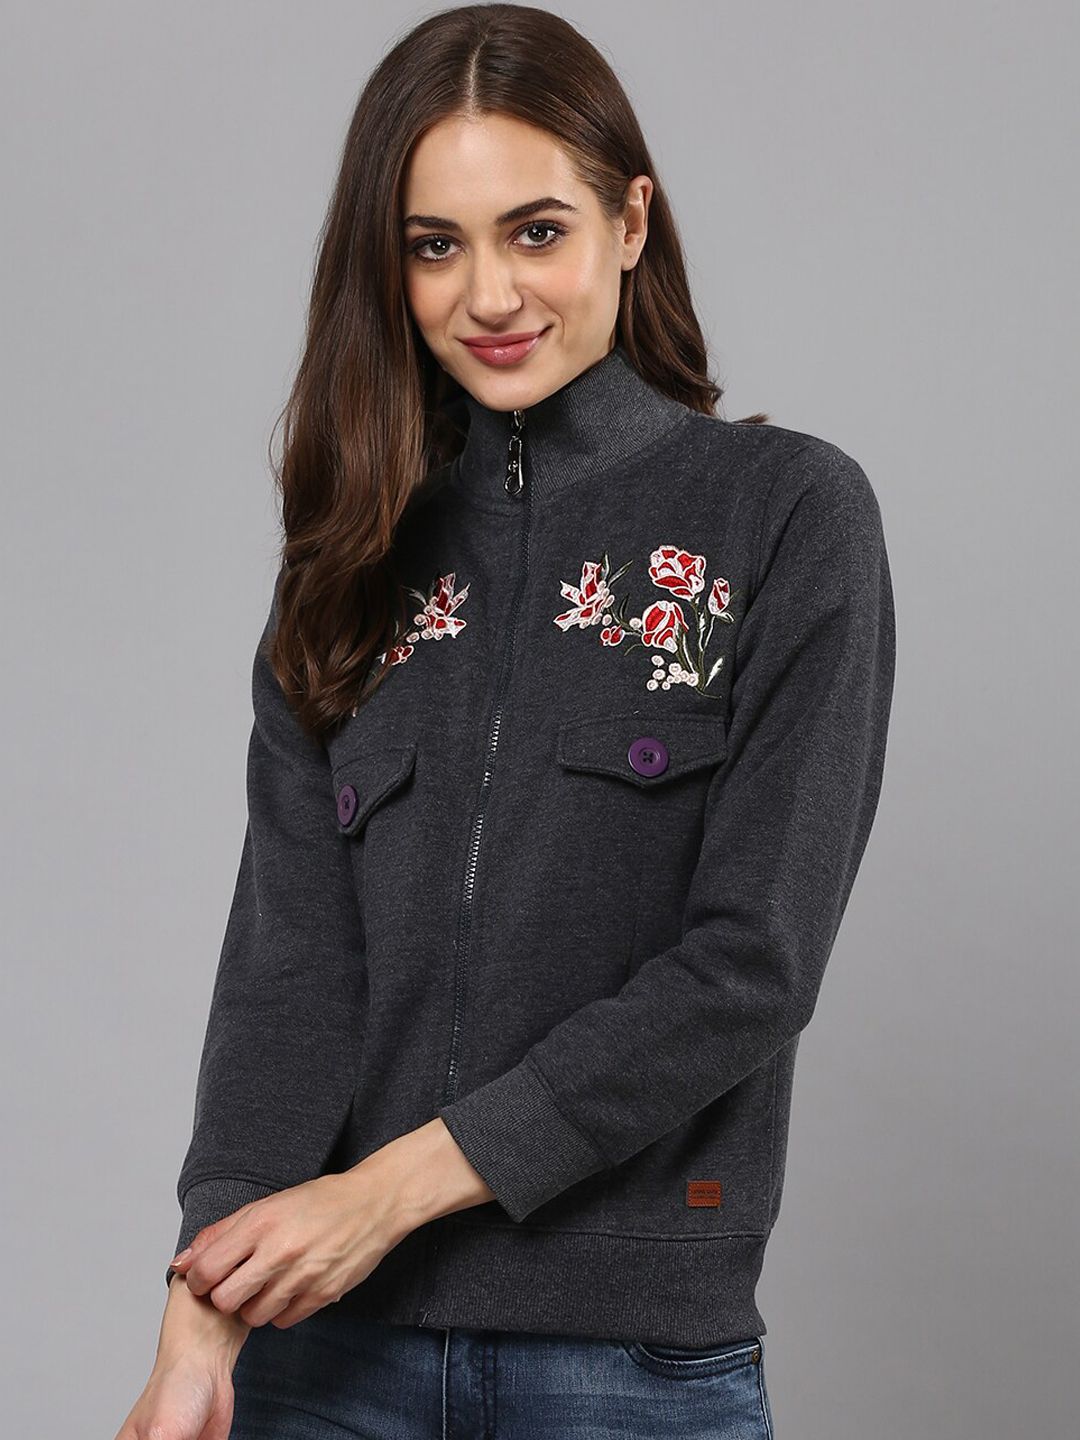 Campus Sutra Women Charcoal Grey & Red Embroidered Sweatshirt Price in India